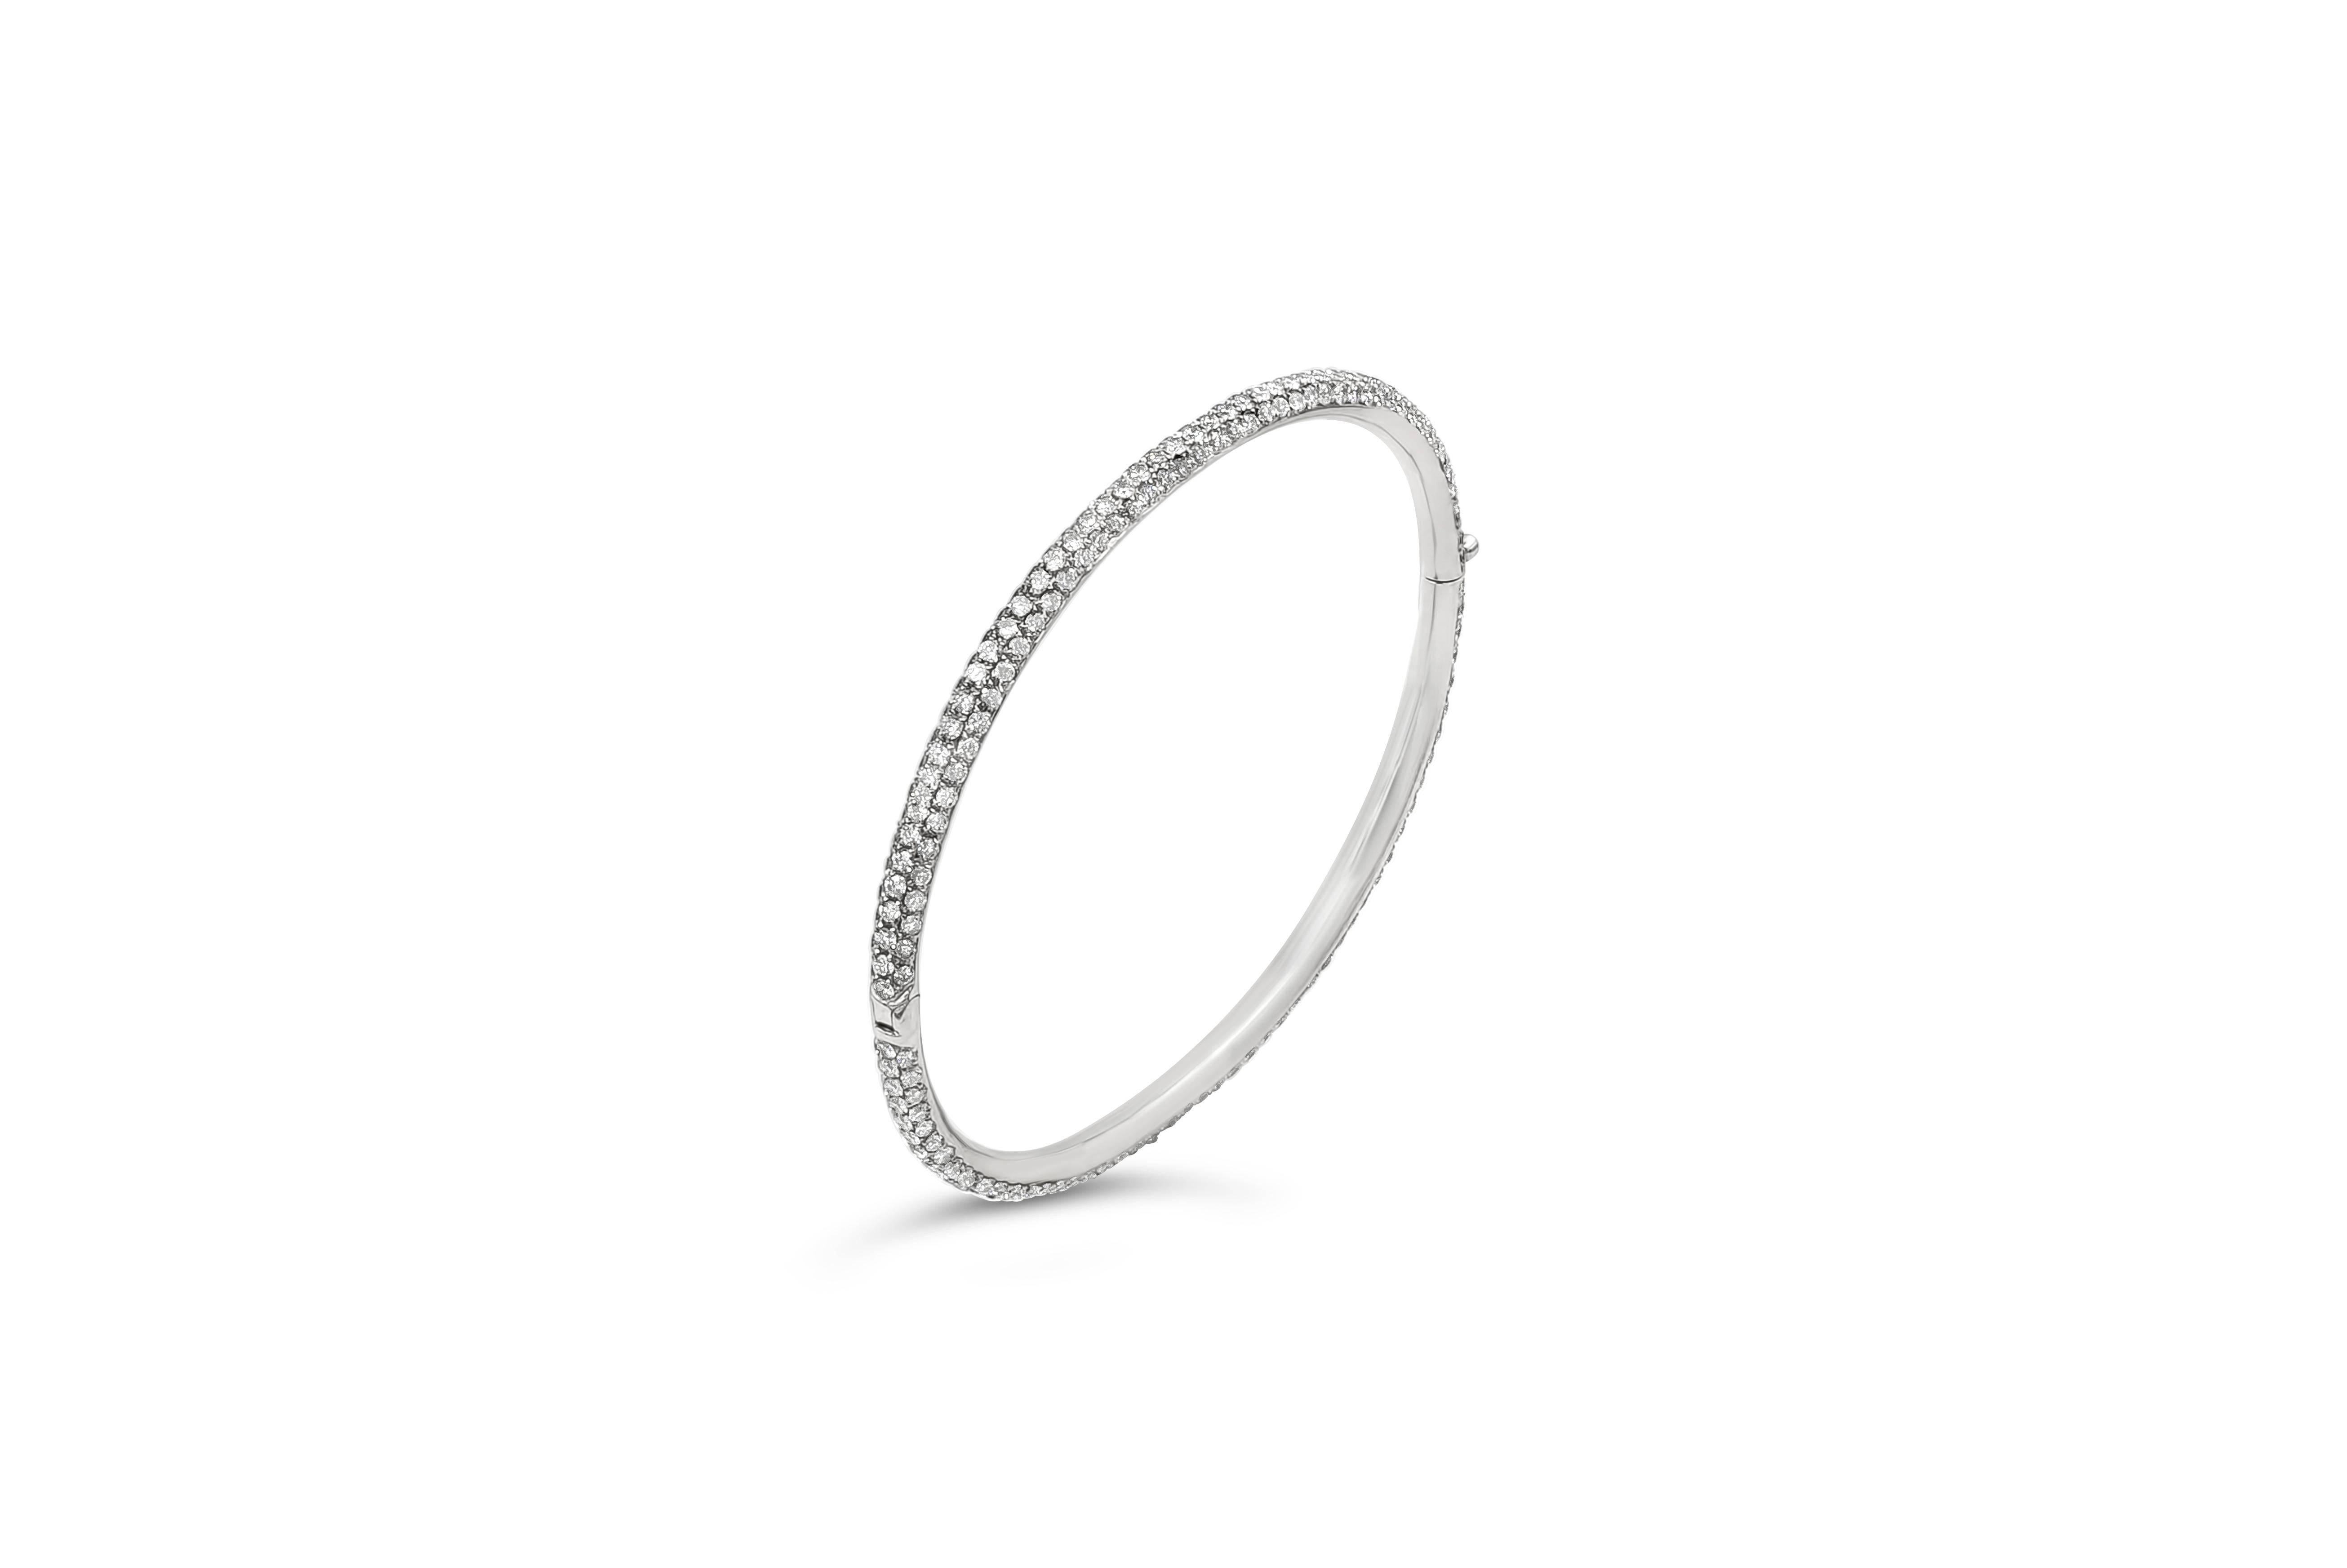 A classic bangle bracelet encrusted with 293 round brilliant diamonds pave set weighing 4.76 carats total. Made with 18K White Gold. 

Roman Malakov is a custom house, specializing in creating anything you can imagine. If you would like to receive a